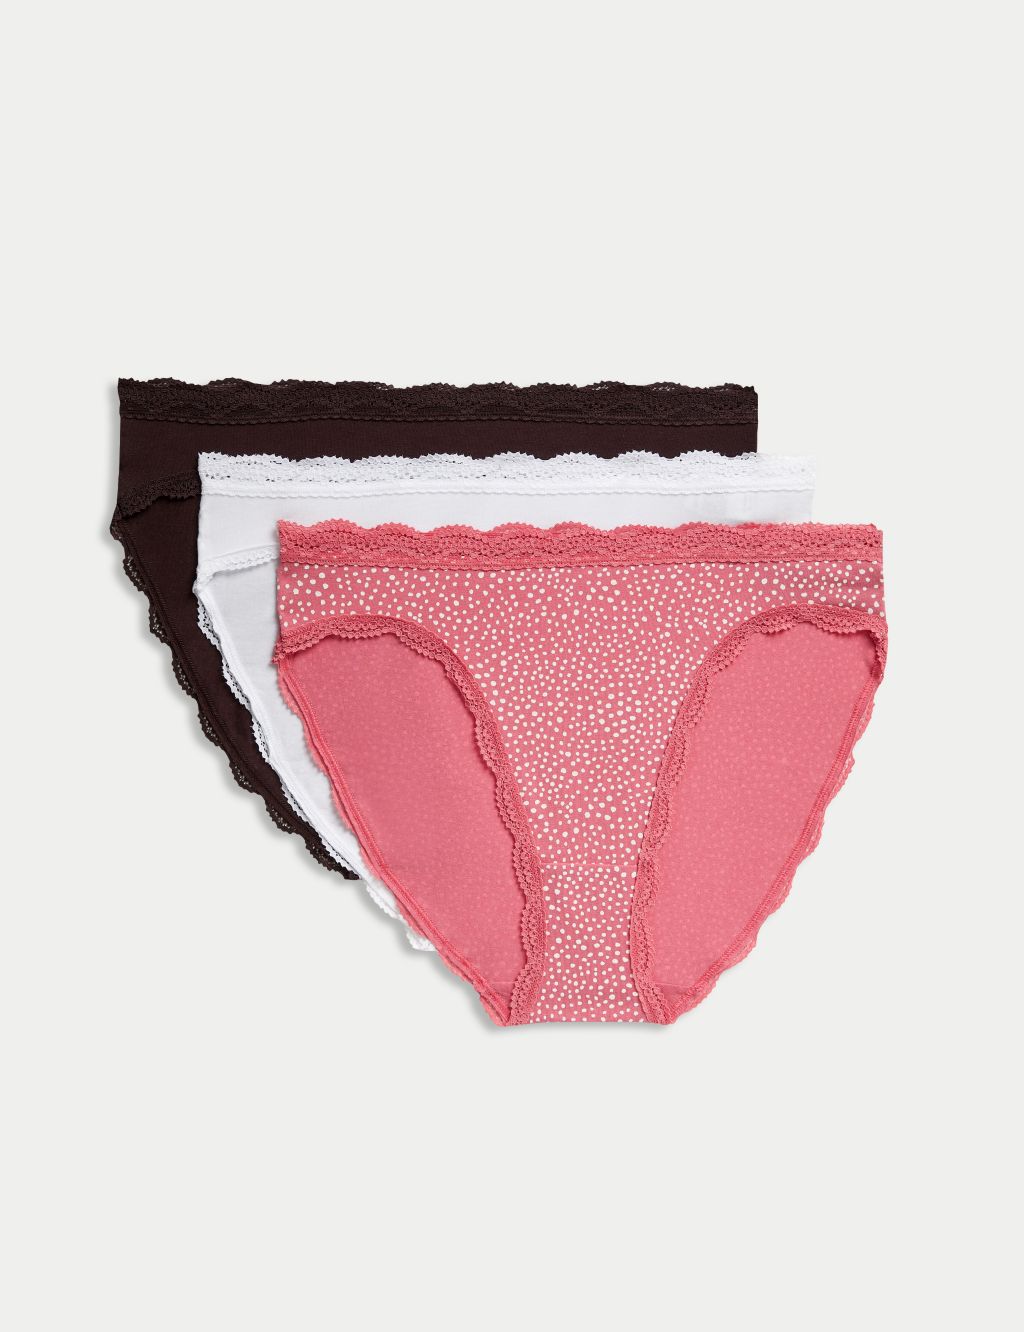 Five Pack Pink Floral Knickers - TK Maxx UK